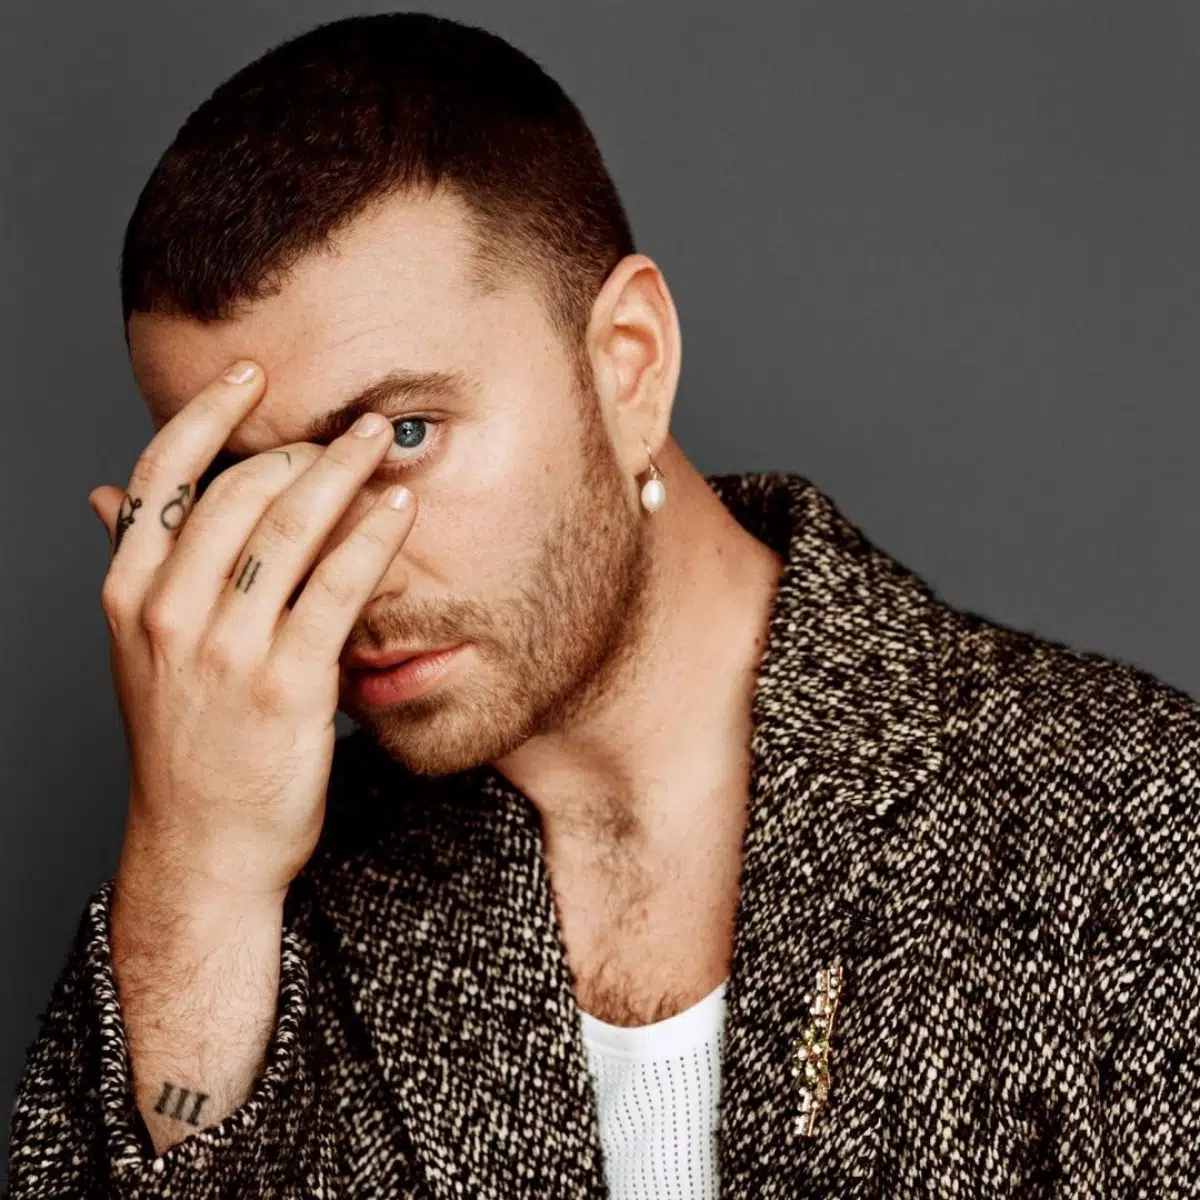 DOWNLOAD: Sam Smith – “Too Good At Goodbyes” Video + Audio Mp3